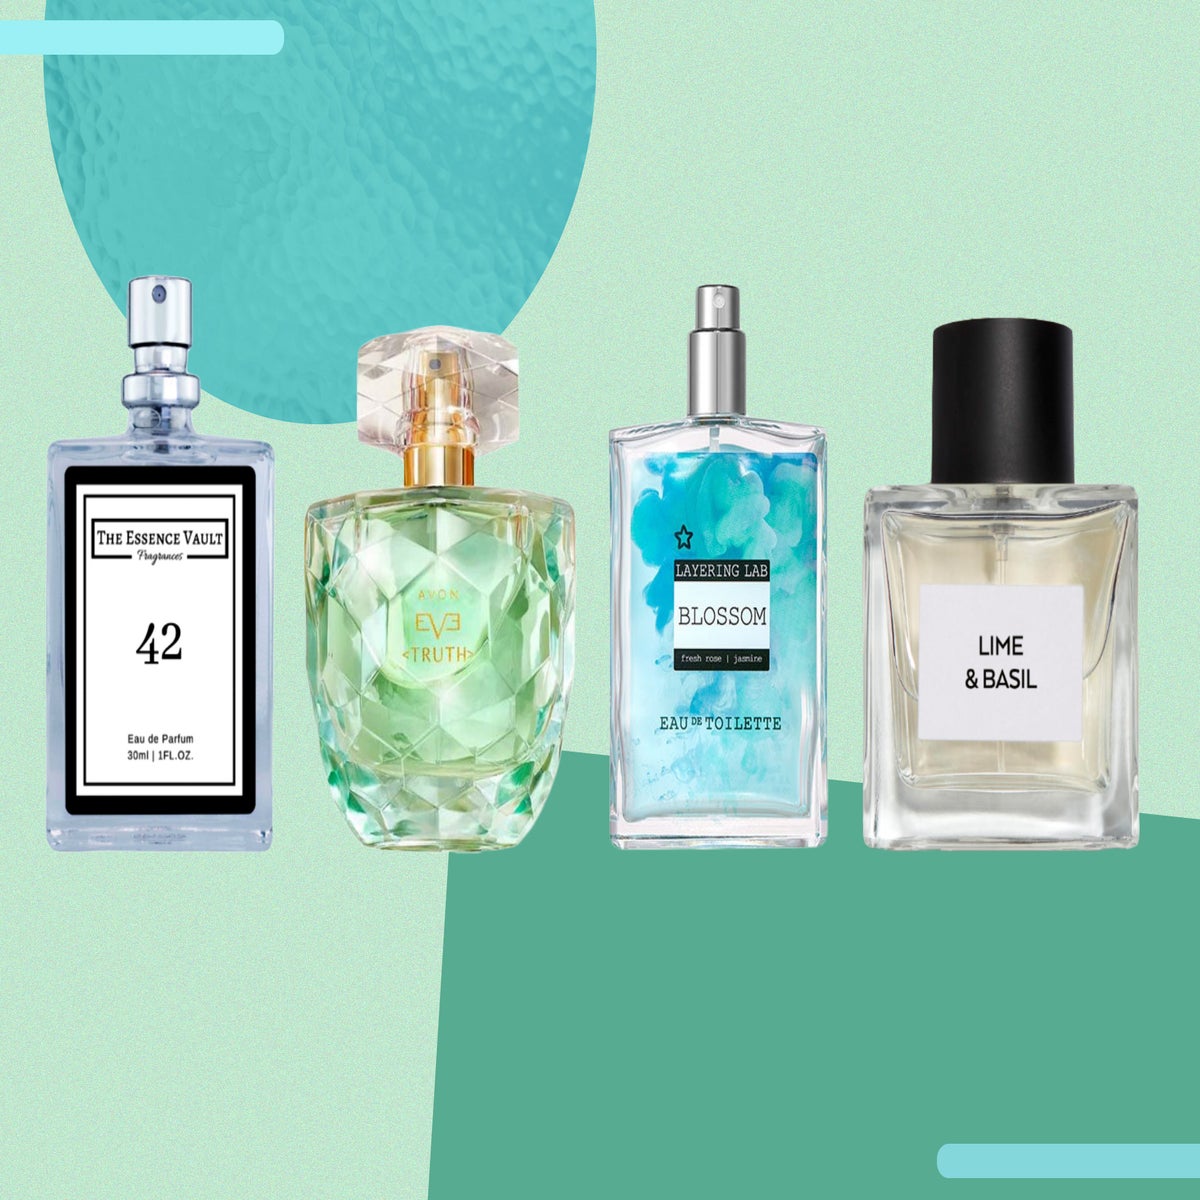 Best Perfume Dupes